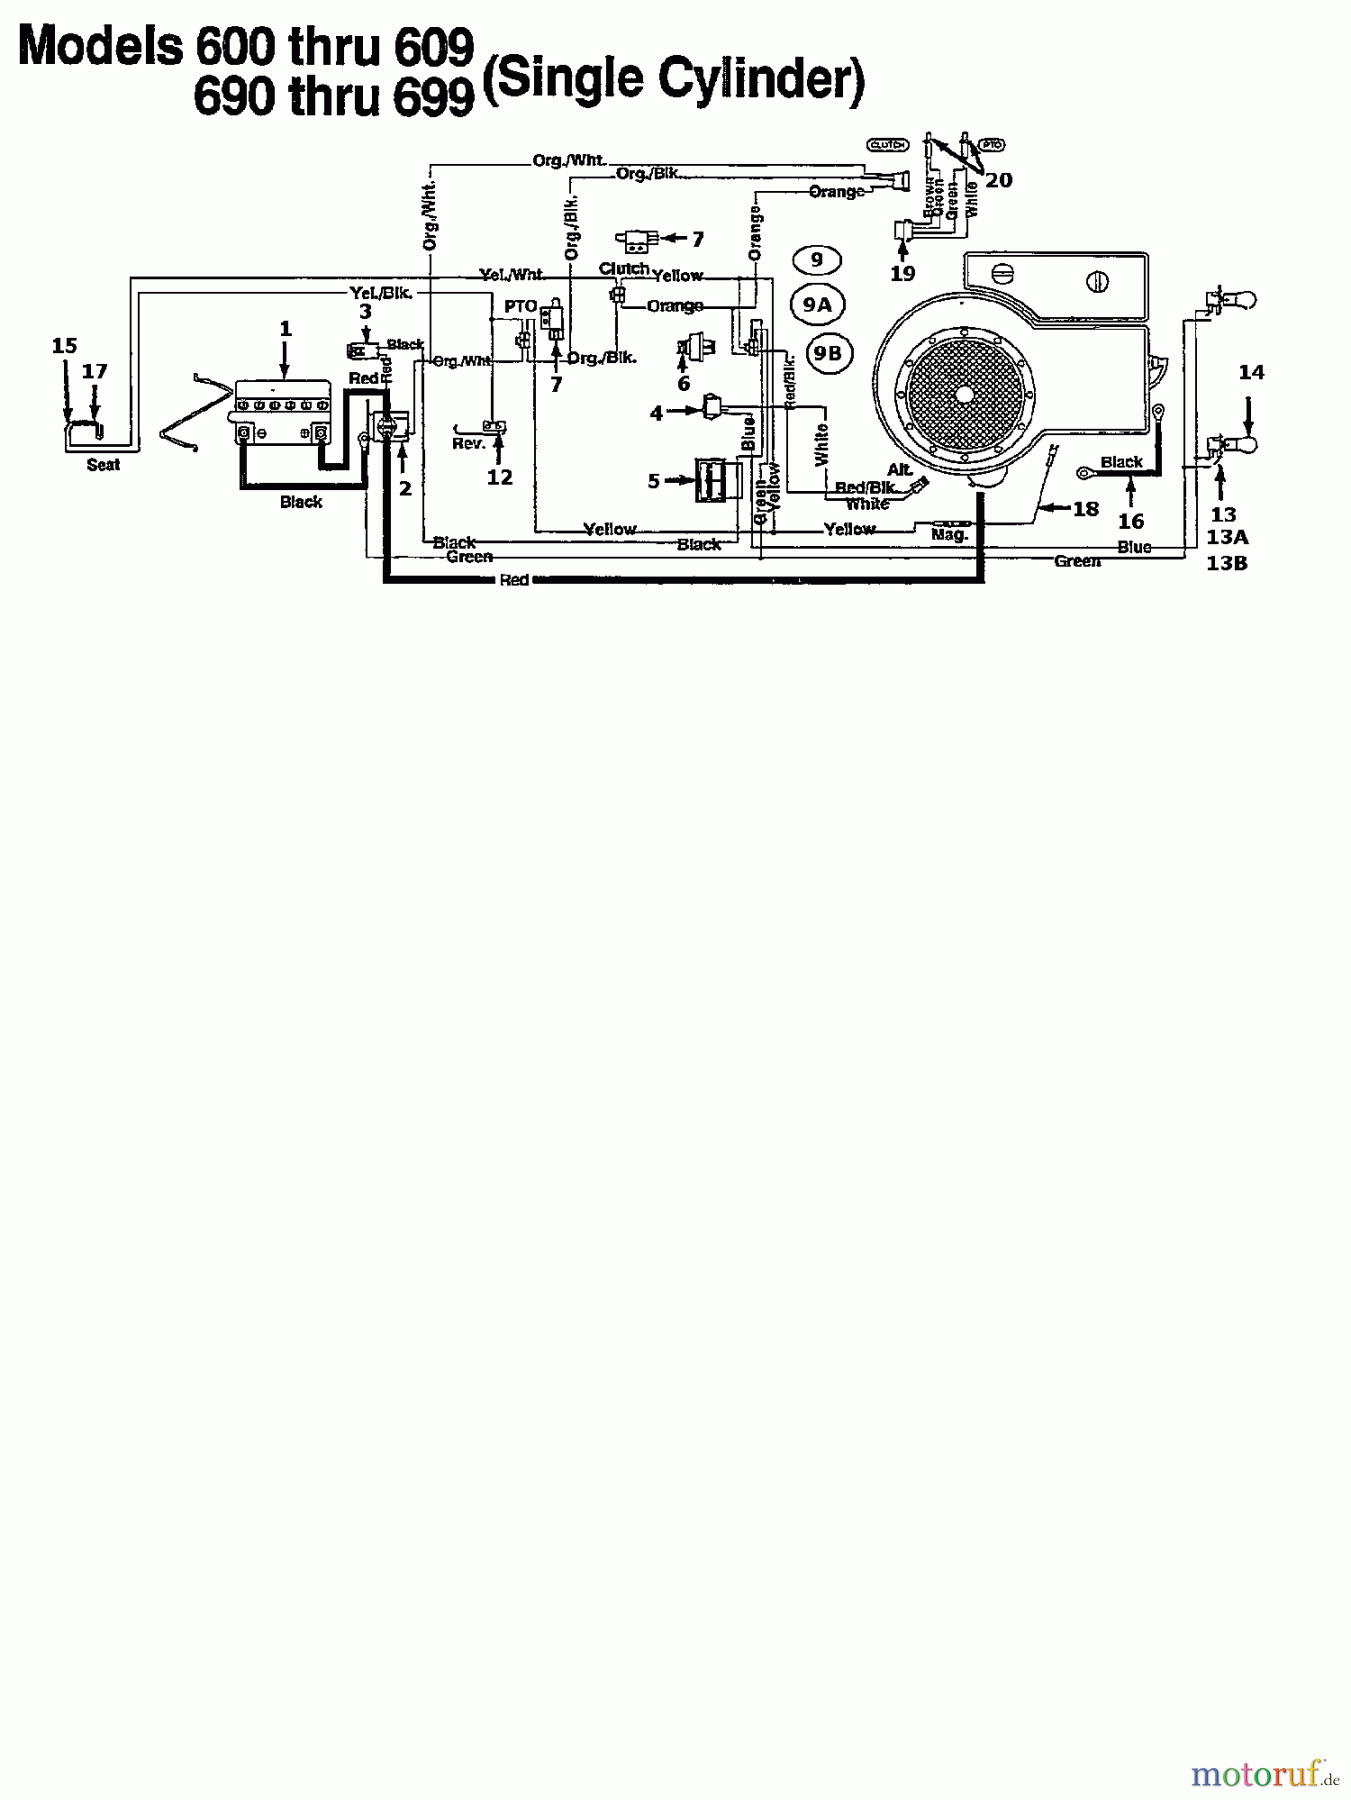  MTD Lawn tractors H 165 135T695G678  (1995) Wiring diagram single cylinder